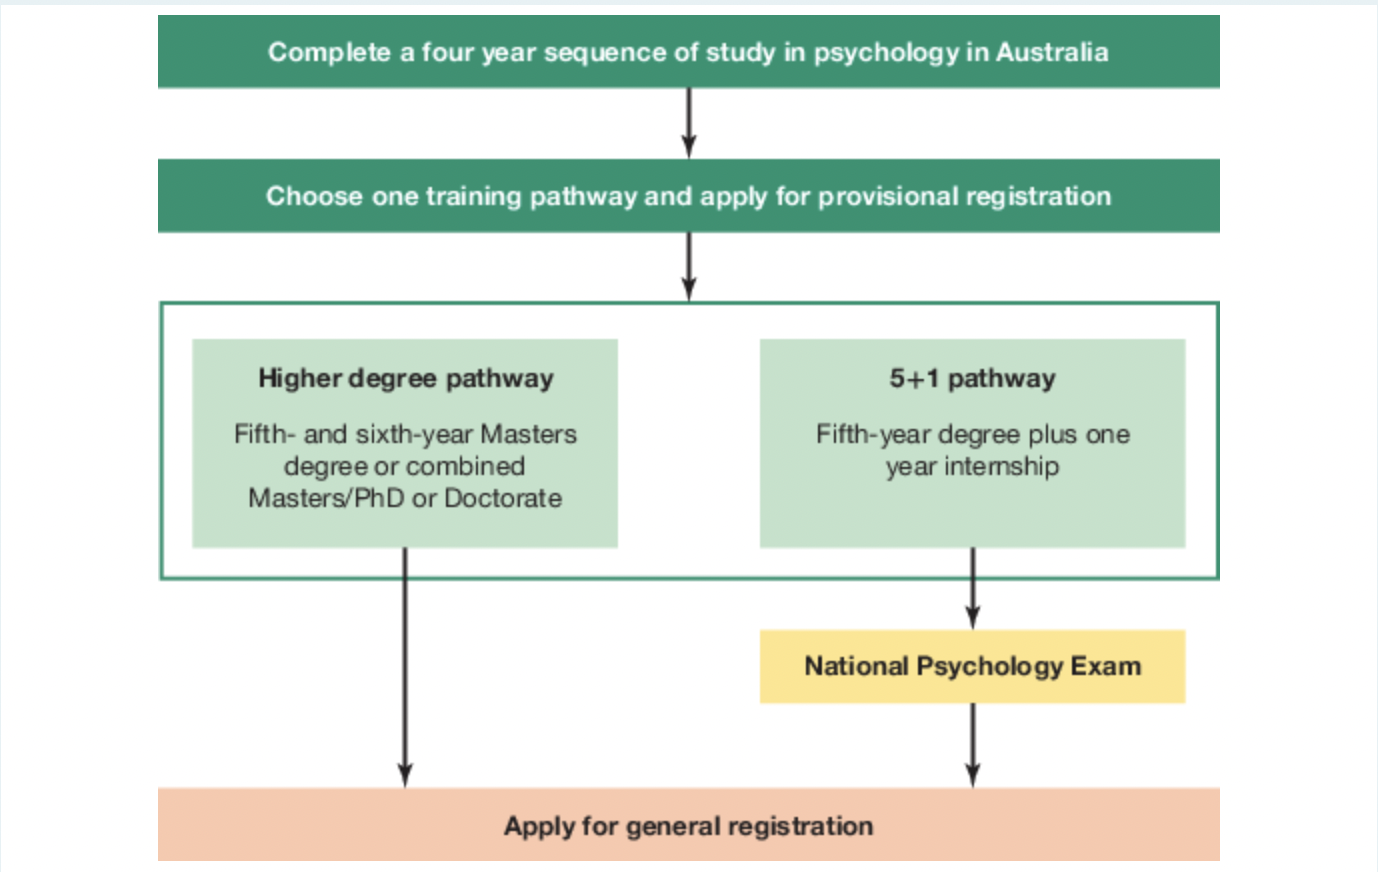 <p>a professional trained in the science of how people think, feel and behave.</p><p></p><ul><li><p>can only work as psychologist &amp; use psychologist title if they are registered by BPA + Aus Health Practitioner Regulation Agency</p></li></ul>